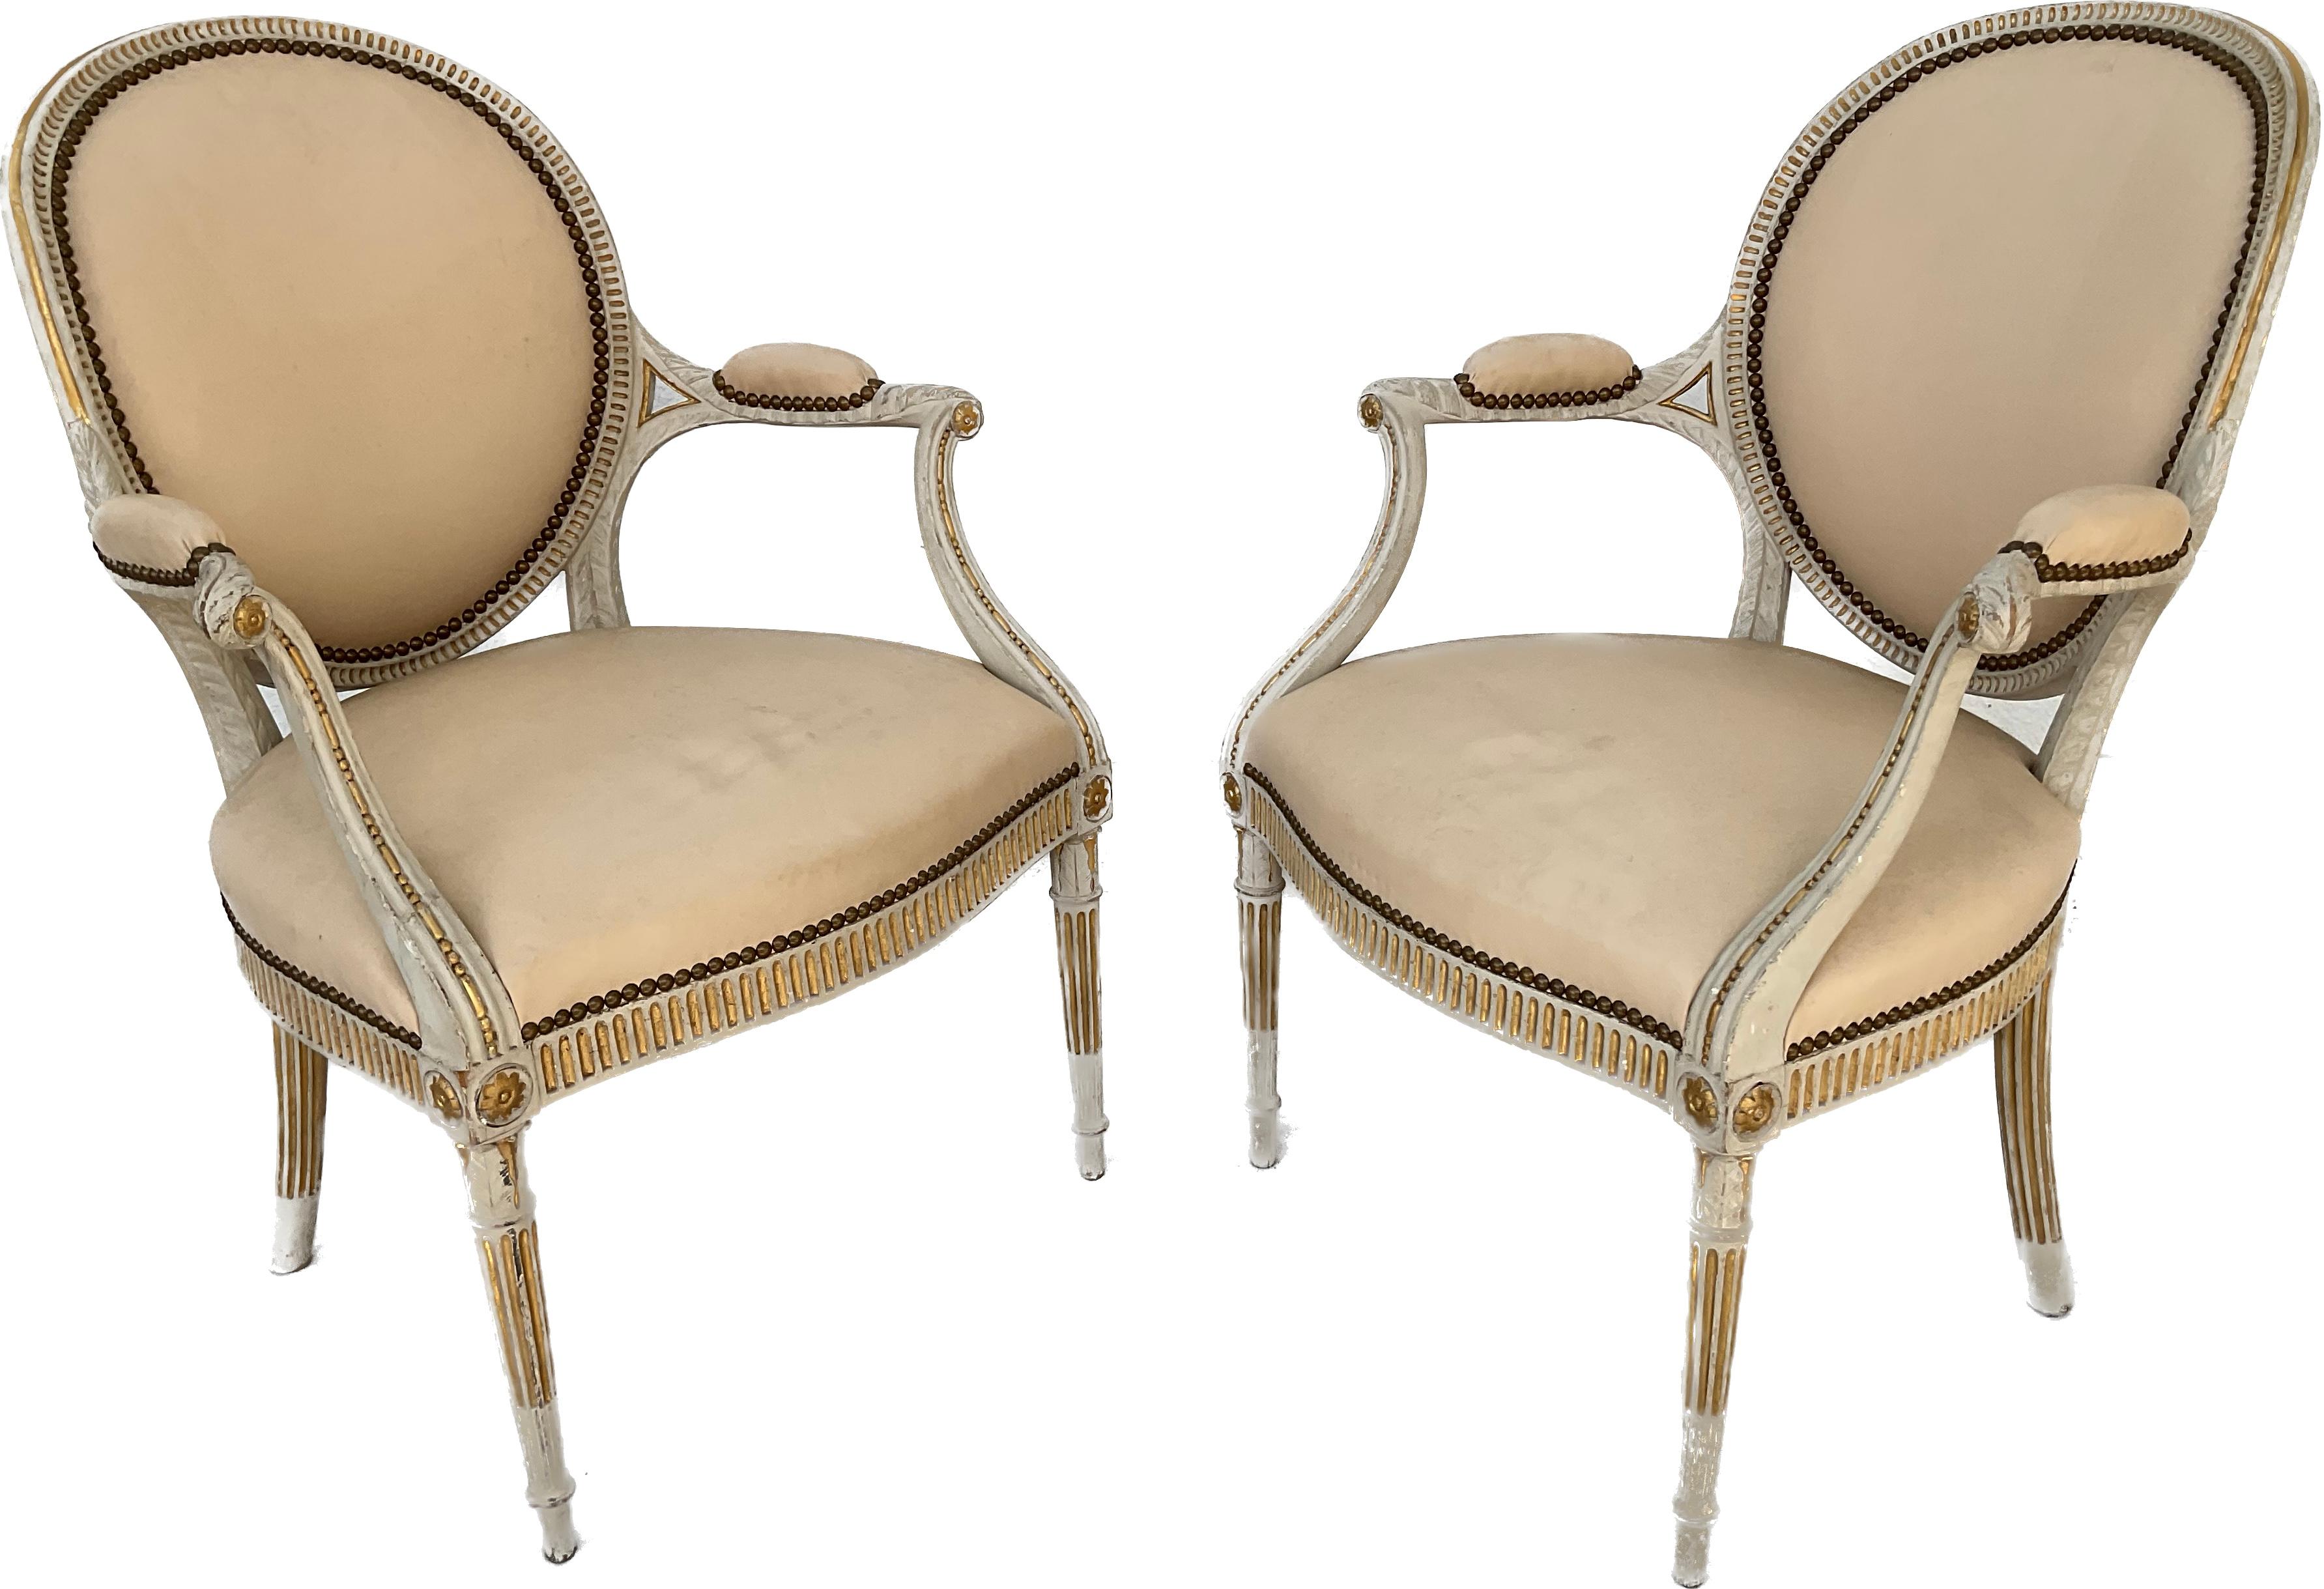 Pair of Georgian Style Painted Armchairs In Good Condition For Sale In Bradenton, FL